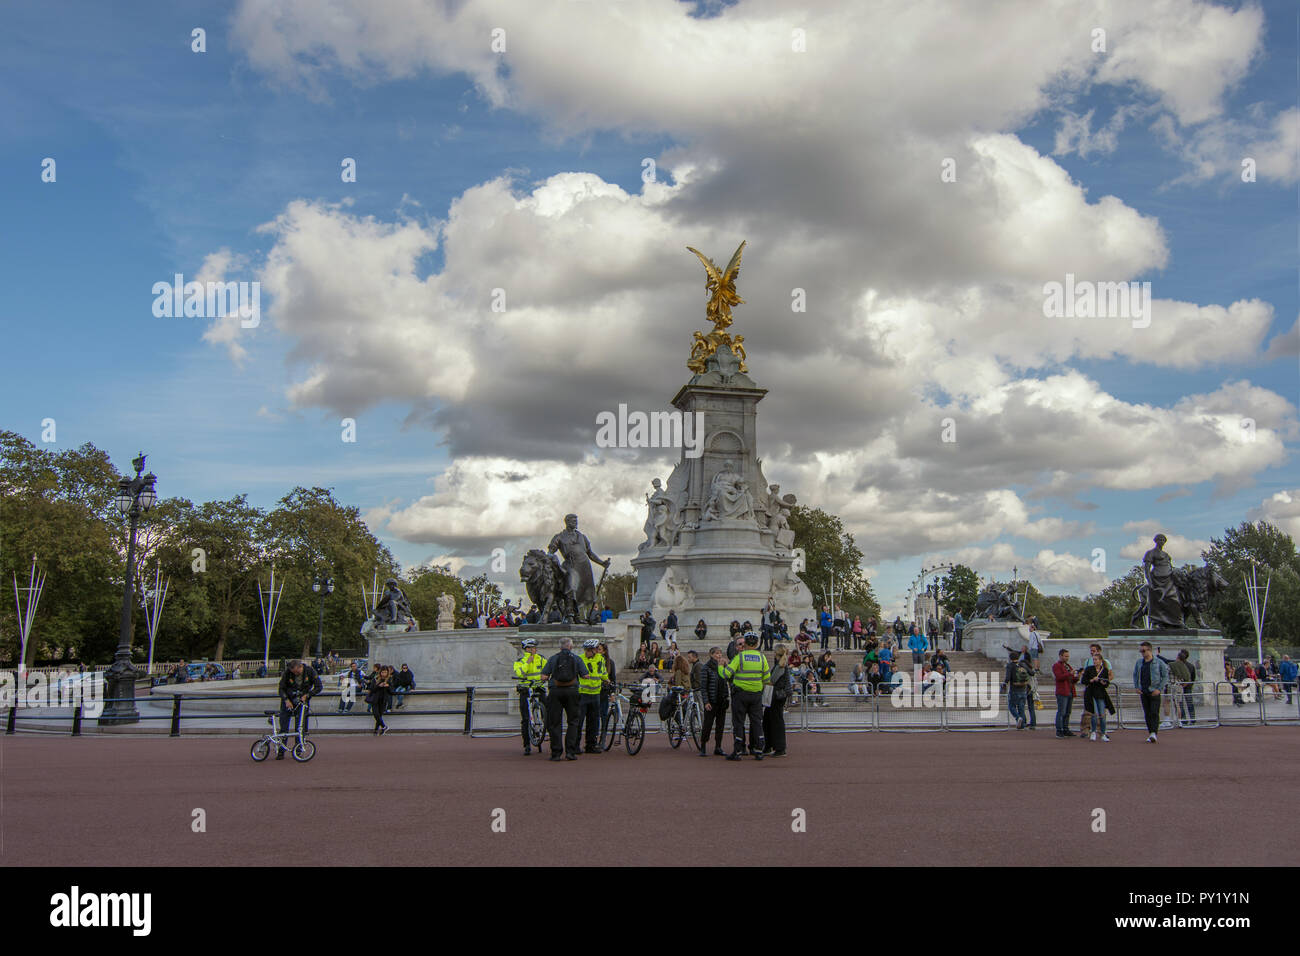 The Queen Victoria Memorial - St James's Park view from Buckingham palace side. Landmark architectural piece of art Stock Photo